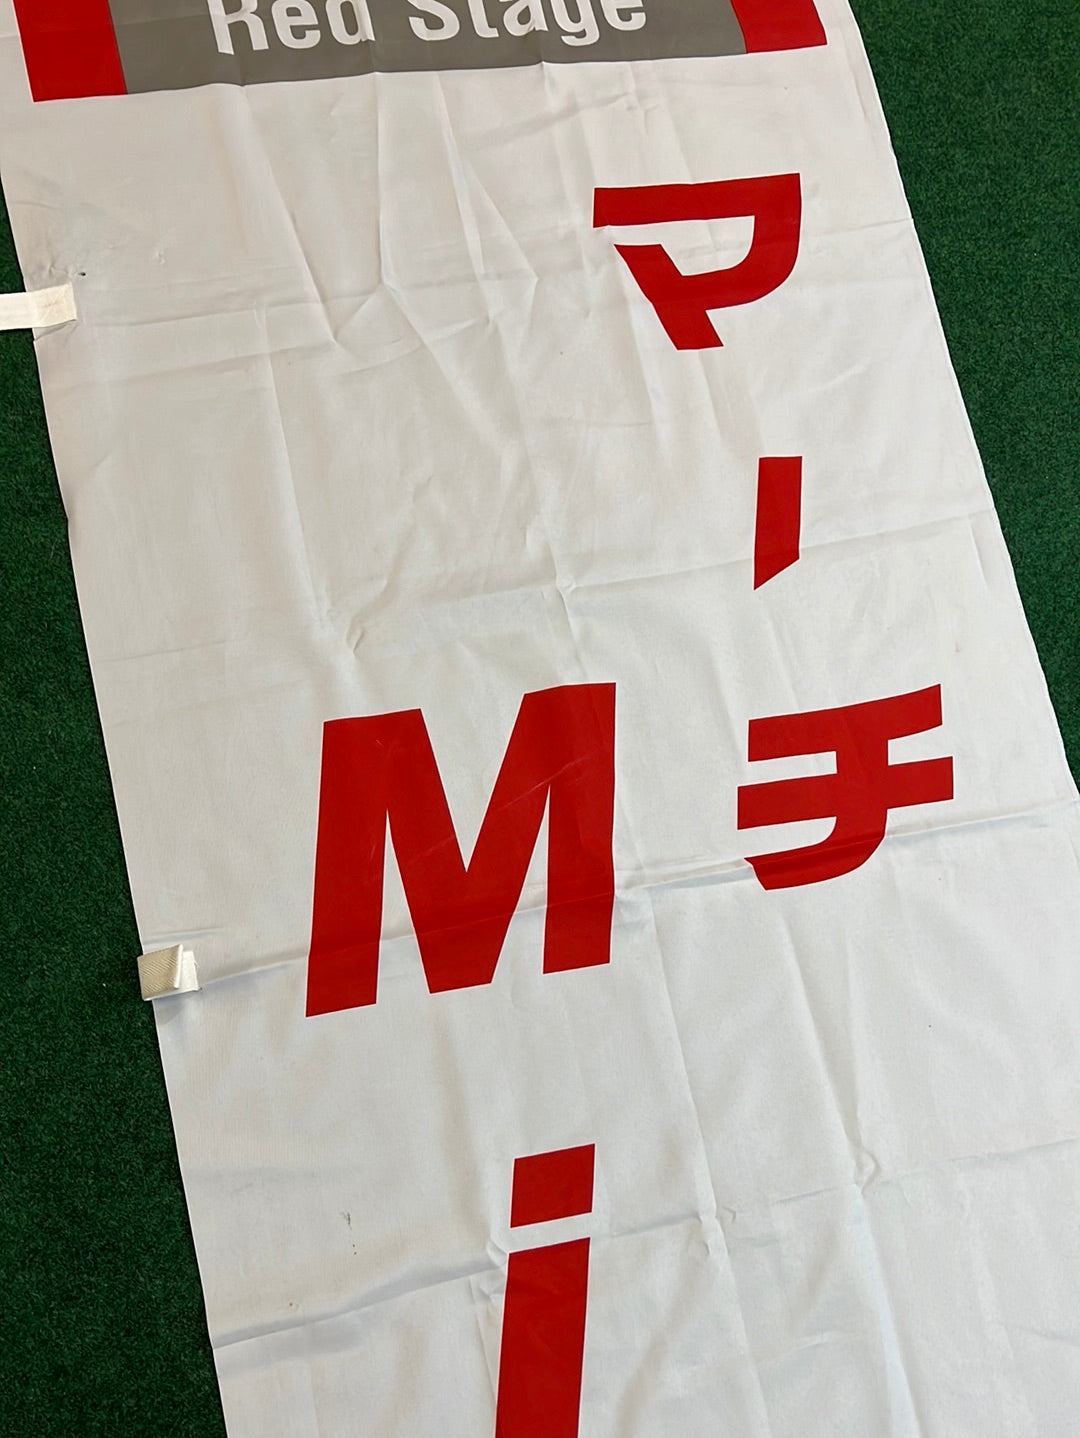 Nissan Red Stage - Mia (New Appearance) Nissan Dealer Nobori Banner